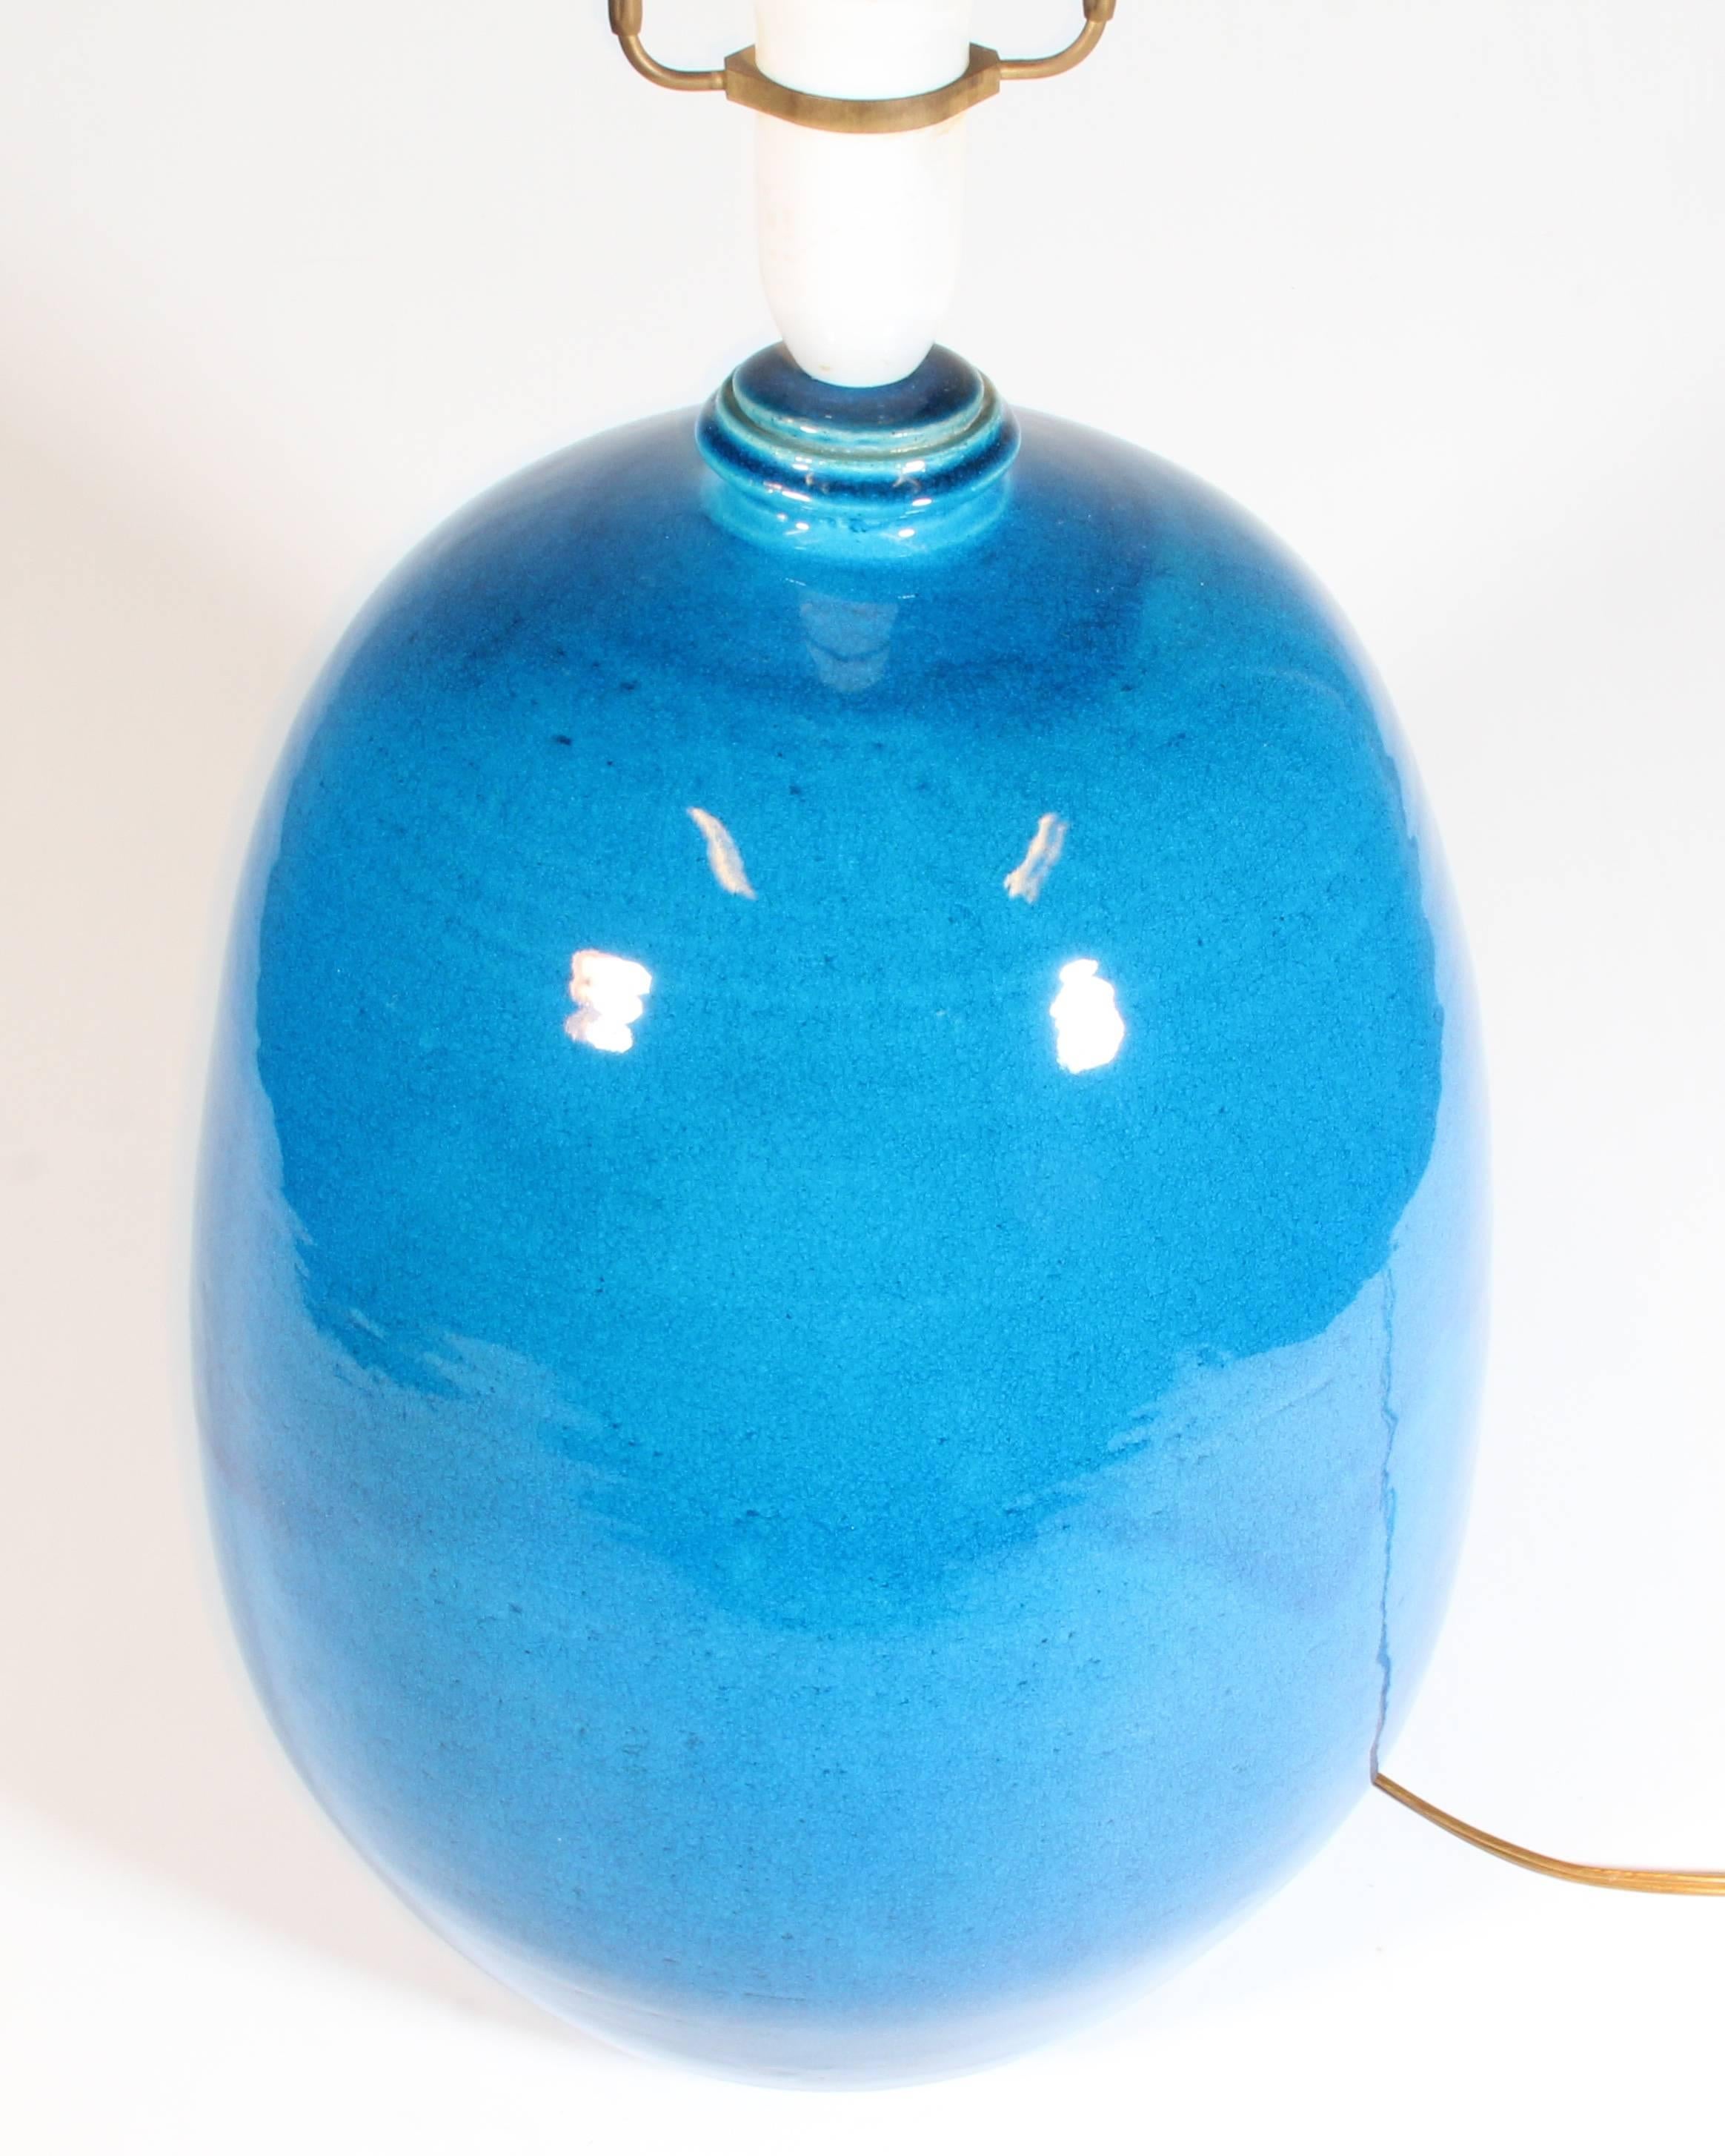 Blue table lamp in hand glazed ceramic by Kähler, Denmark. This piece is 41 cm without holder and 59 cm with.